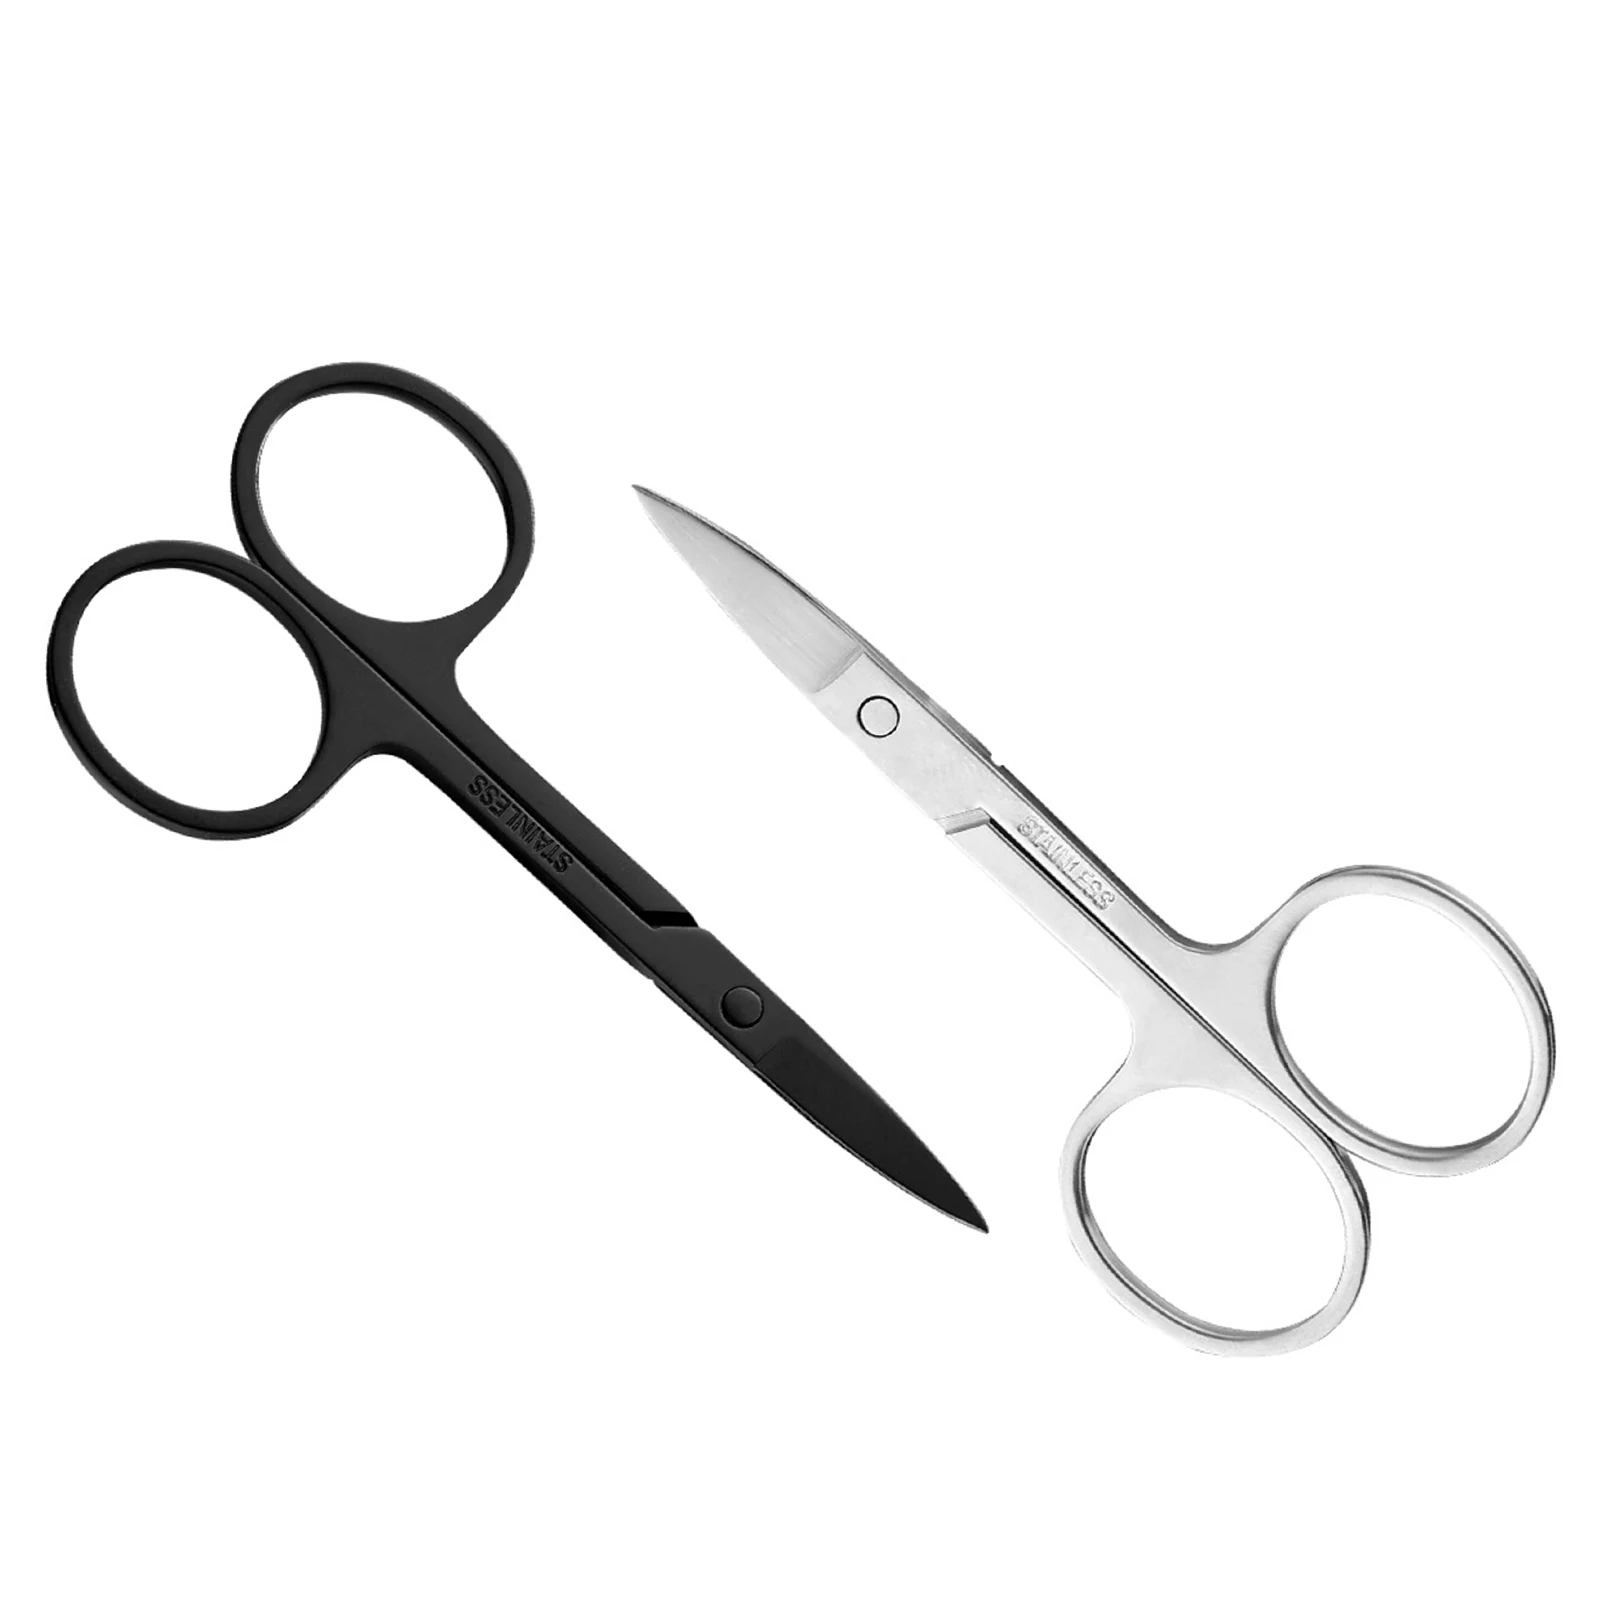 

New Professional Stainless Nails Eyebrow Nose Eyelash Cuticle Trimmer Epilator Scissor Manicure Tool Curved Pedicure Scissors